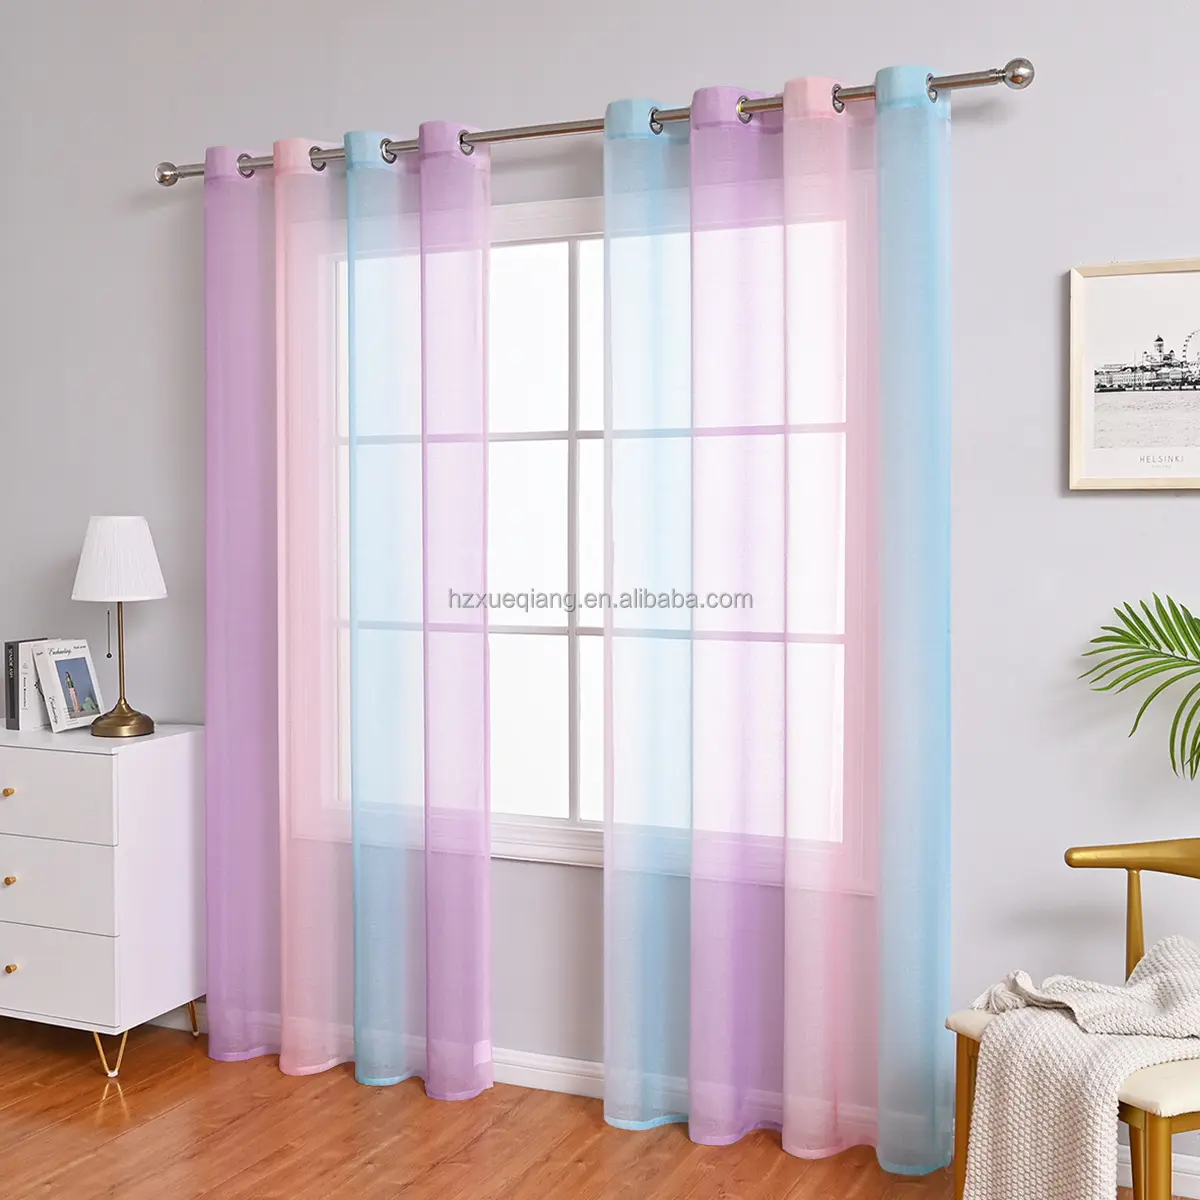 BDZN wholesale printed gradient rainbow multicolor tulle sheer curtains for the living room window treatment home decor